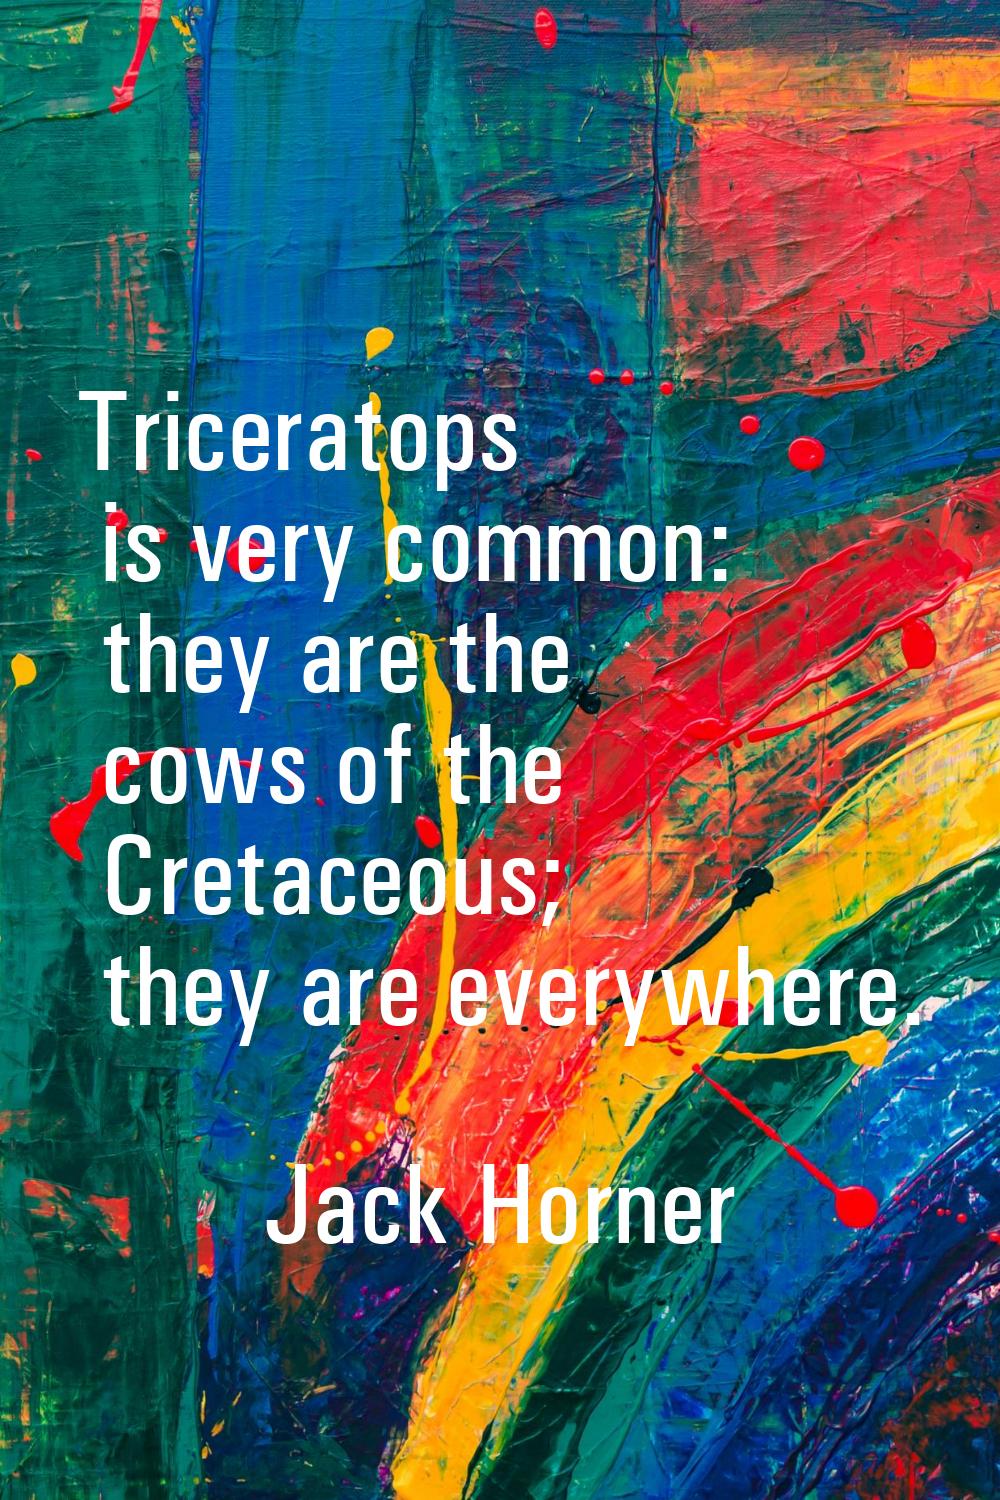 Triceratops is very common: they are the cows of the Cretaceous; they are everywhere.